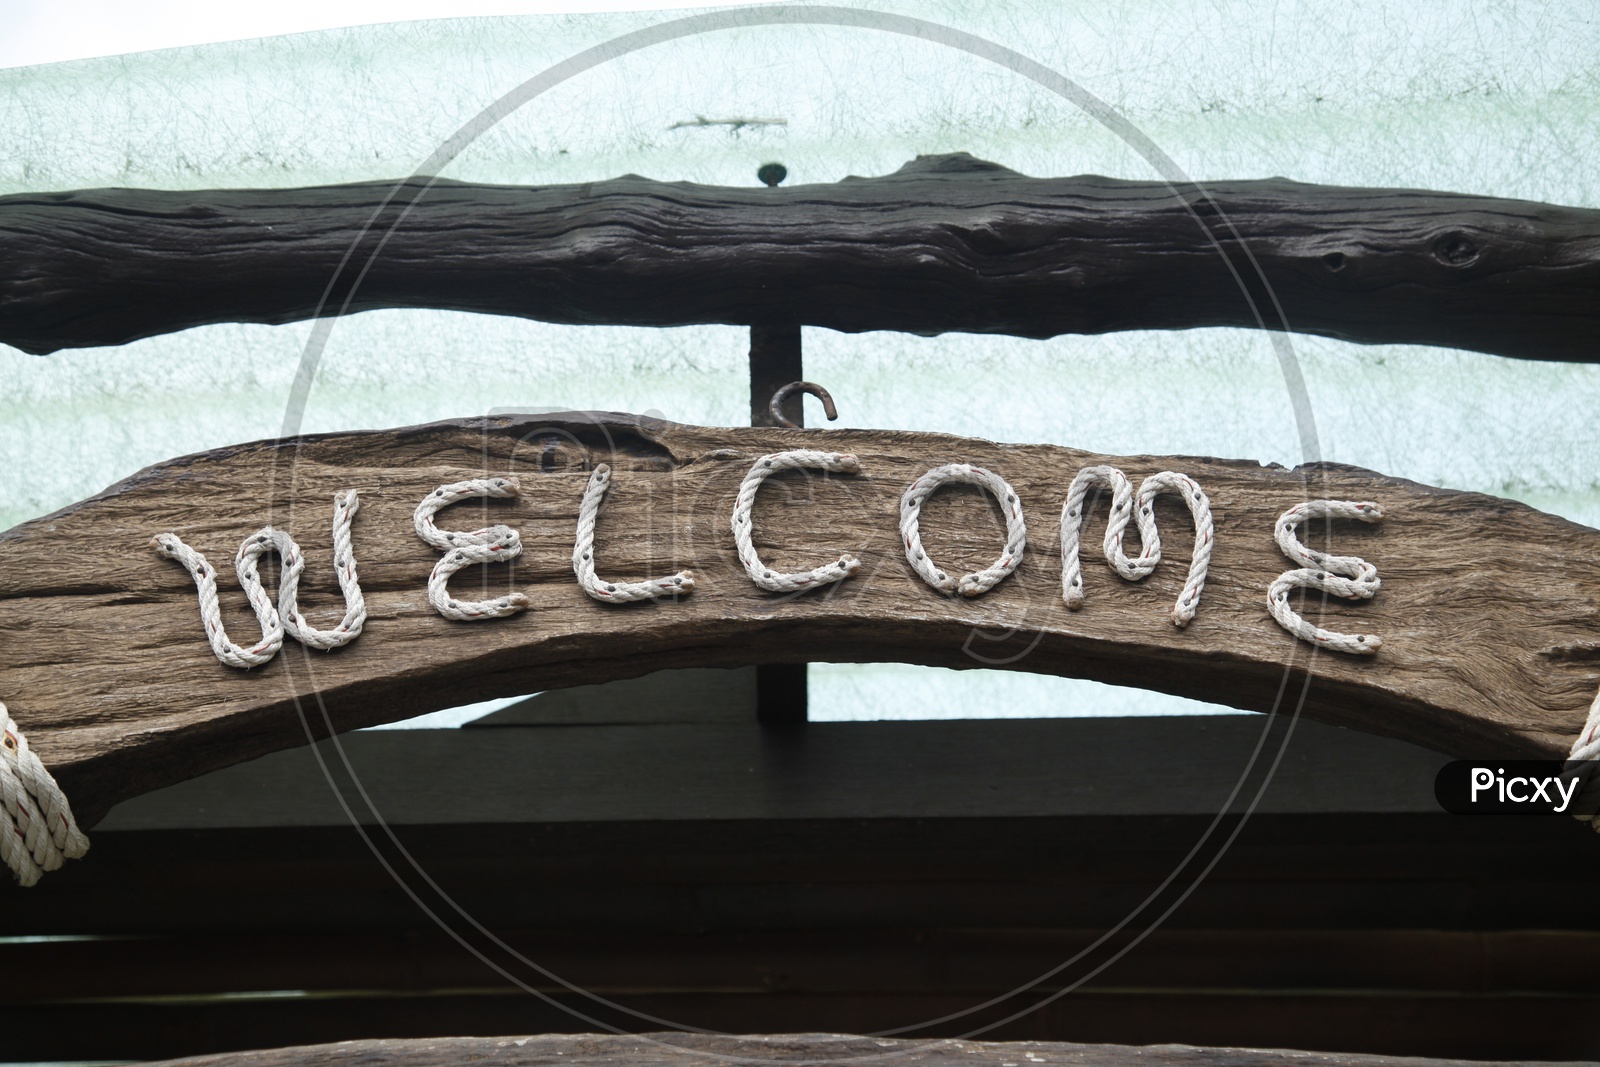 Photograph of welcome board